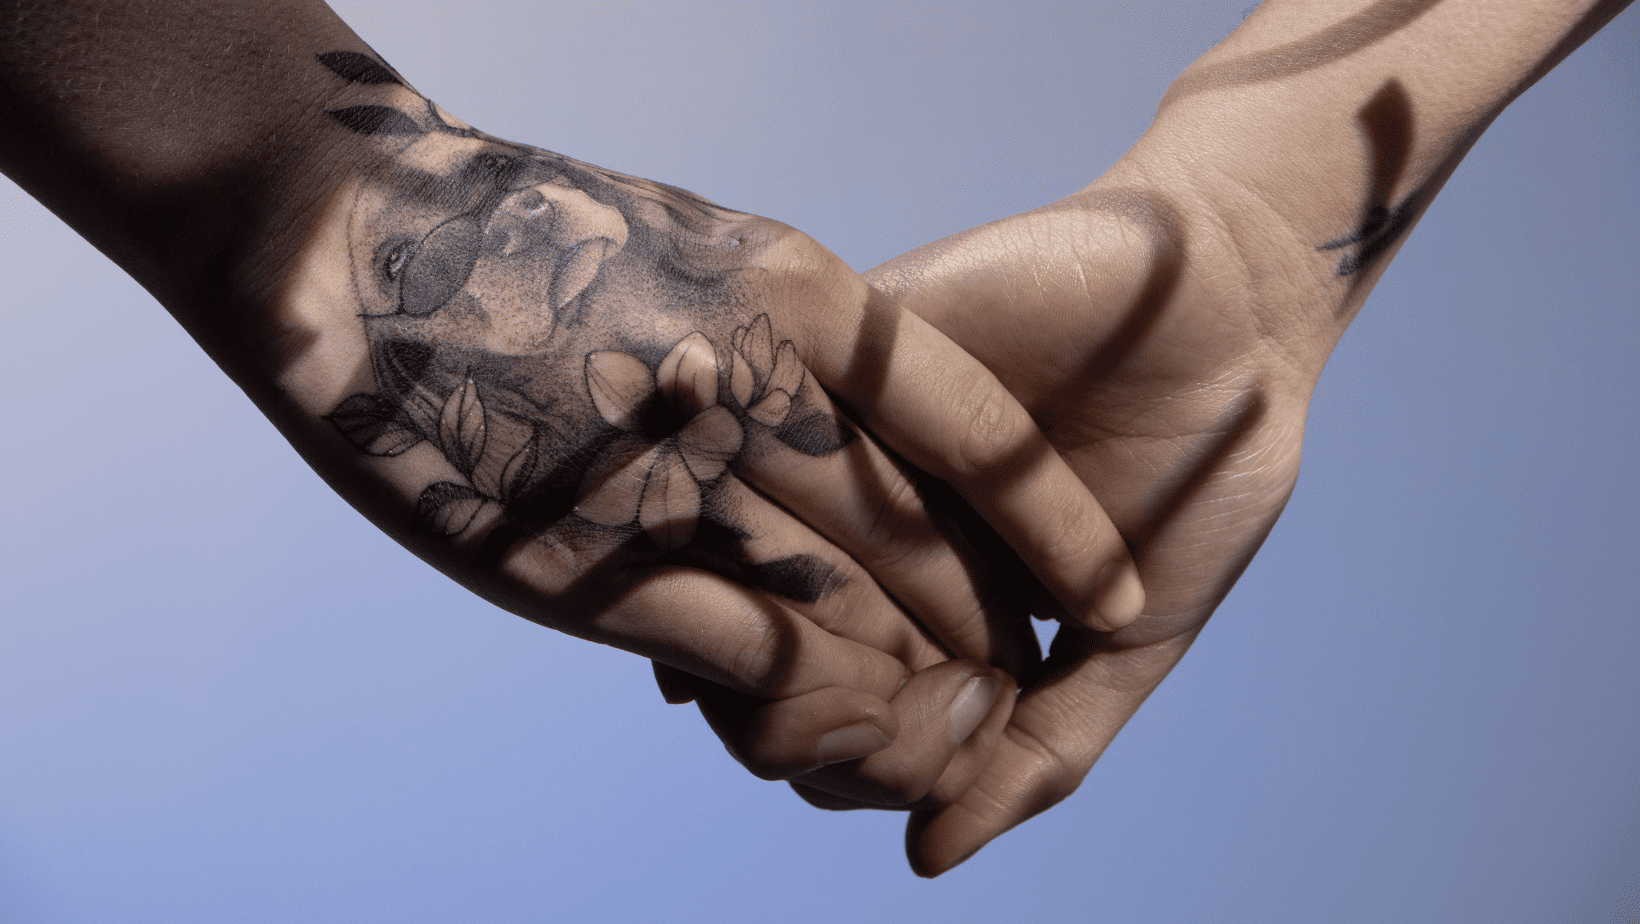 A tattooed hand holding another hand